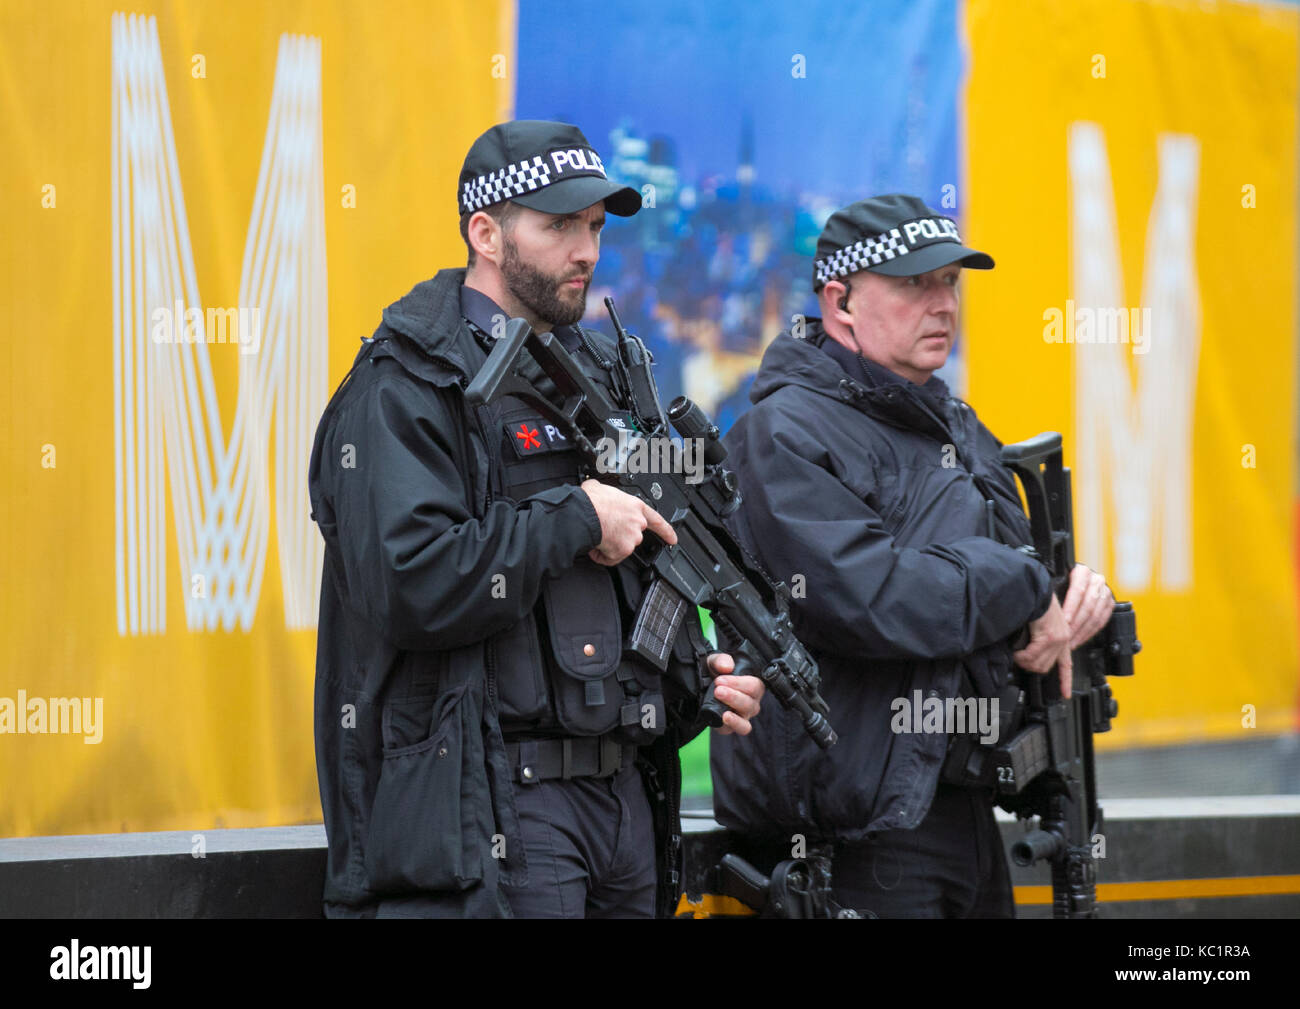 Authorised firearms officer (AFO)  a British police officer in Manchester, UK.  Weapons, policing, police, uniform, british, force, officer, law, armed, security, control, england, patrol, gun, weapon, firearm, military, handgun, pistol, security, crime, protection, patrol, enforcement, cop, crime, shot, danger, black uniforms, firearms and equipment of British Armed Police on duty at the at the Conservative Annual Conference, 2018. Stock Photo